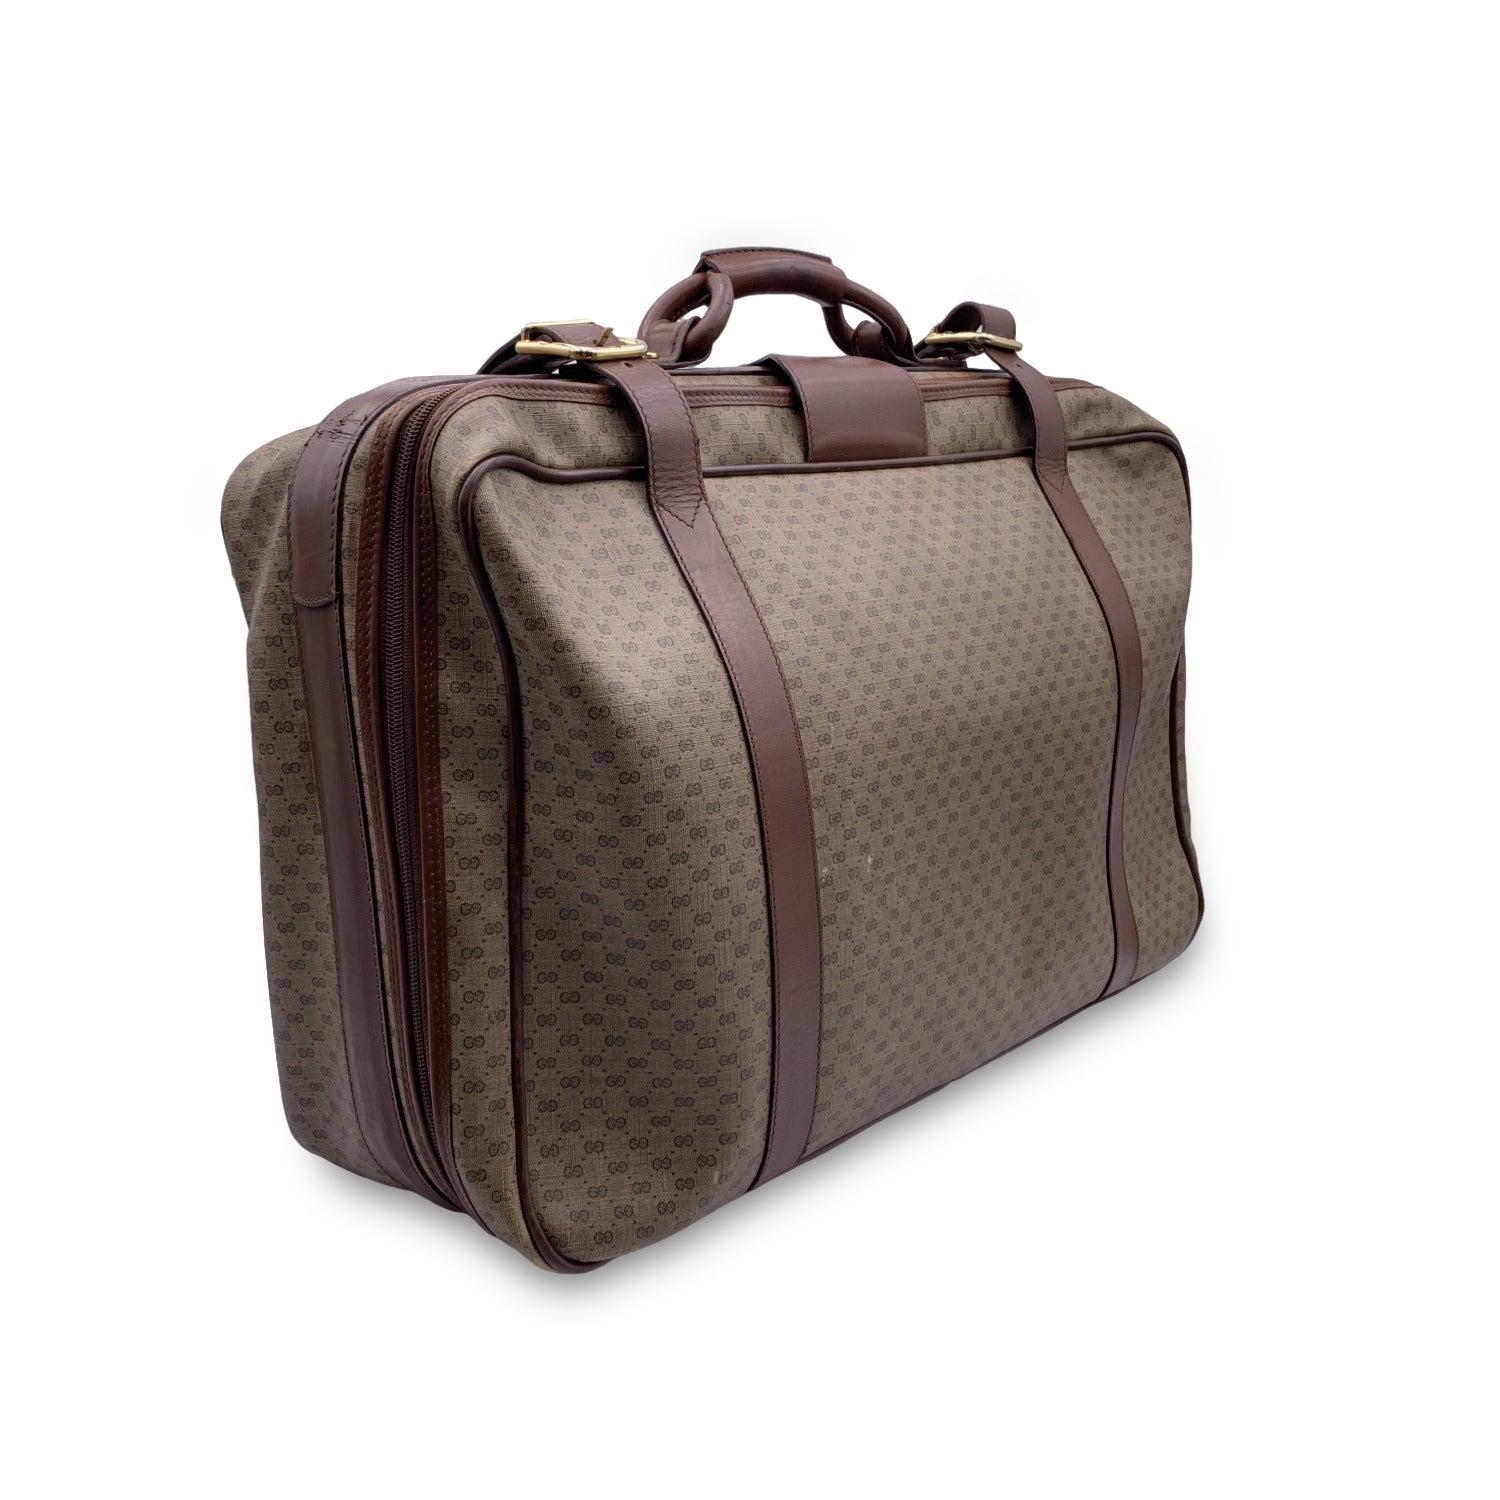 Gucci Vintage Beige Monogram Canvas Suitcase Travel Bag In Good Condition For Sale In Rome, Rome